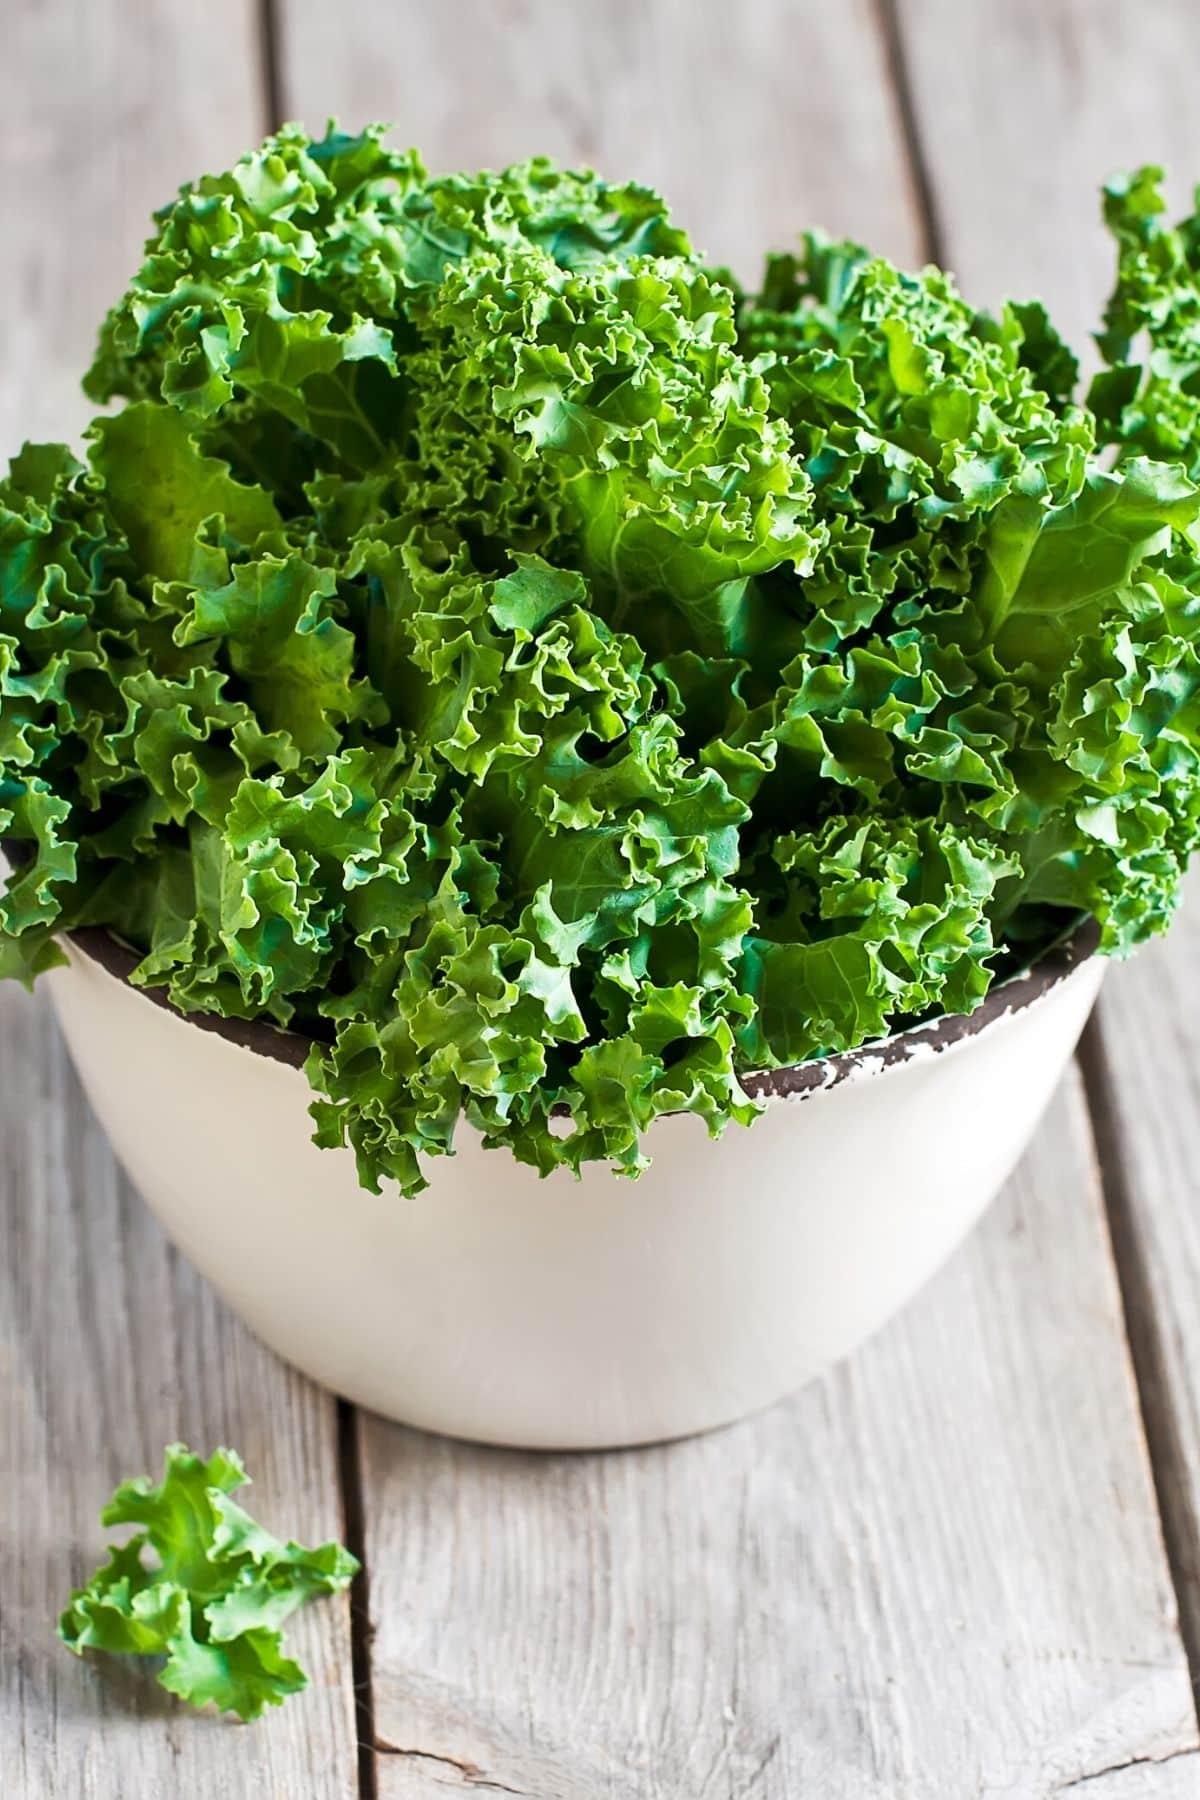 kale in a white bowl on a table.